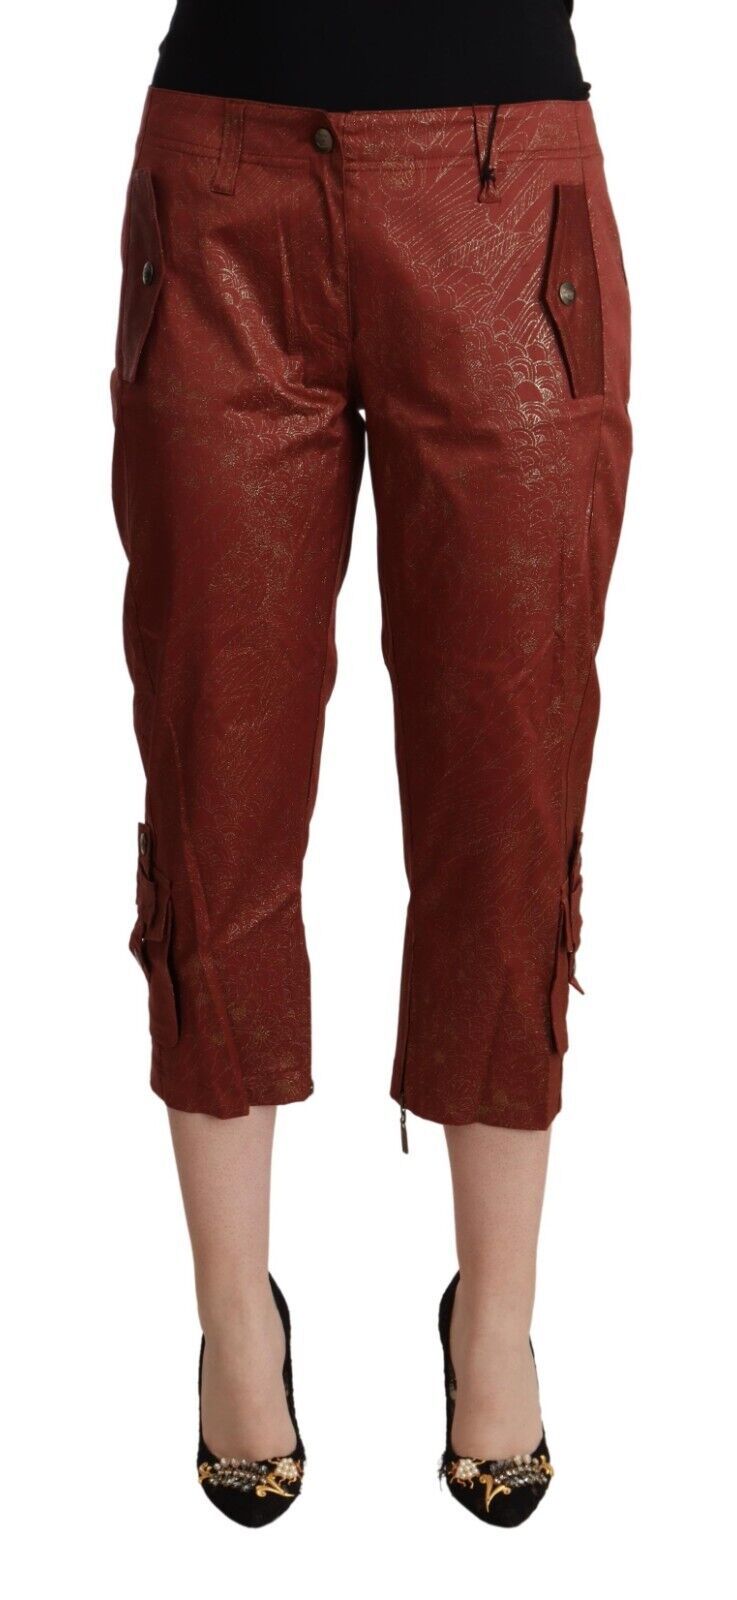 Just Cavalli Chic Brown Cropped Cotton Women's Pants